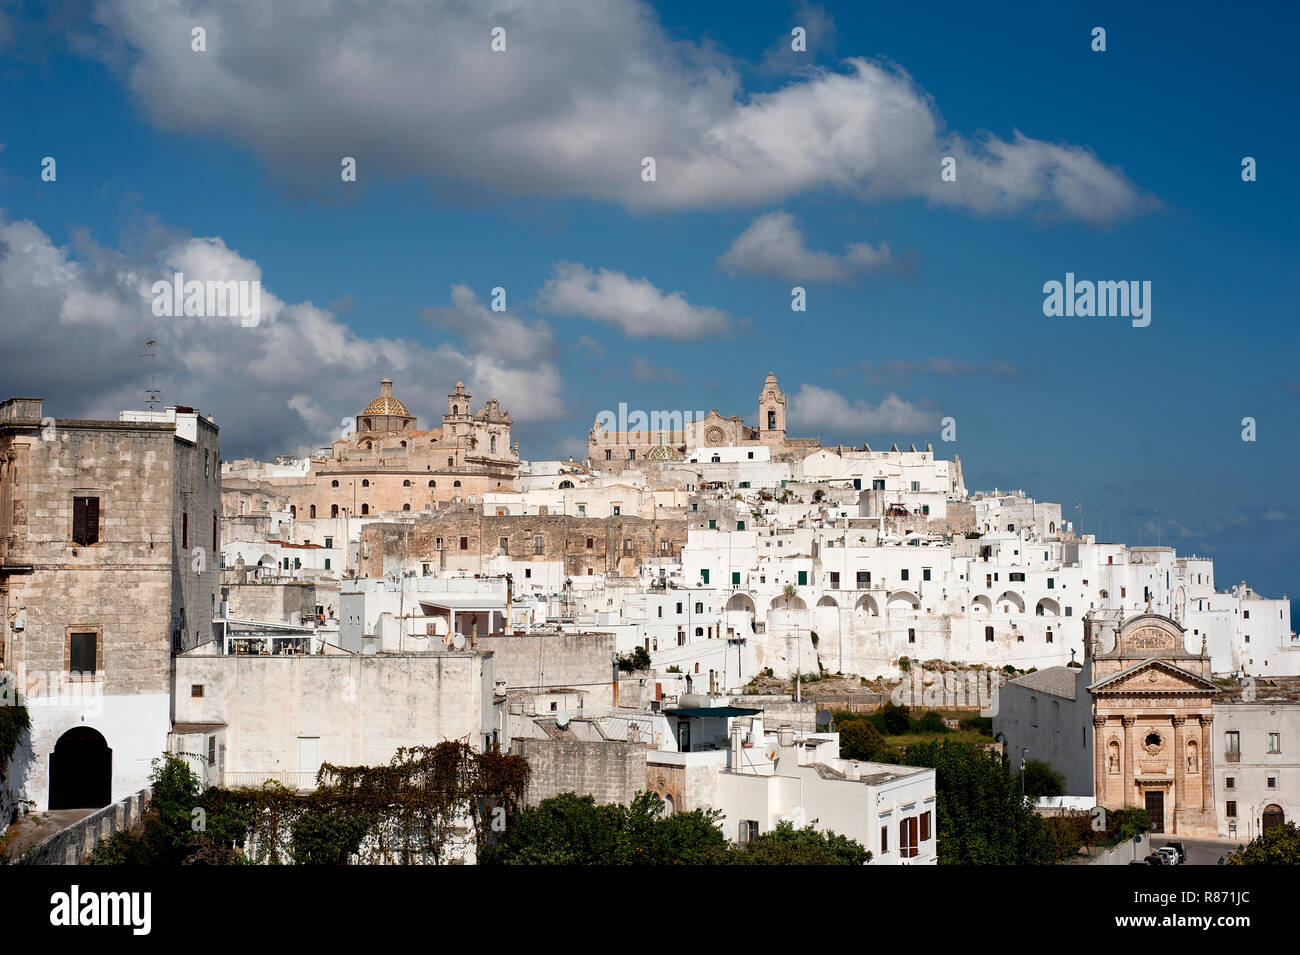 The picturesque old town of Ostuni in southern Italy, built on top of a hill and crowned by its Gothic Basilica or Cathedral. Stock Photo